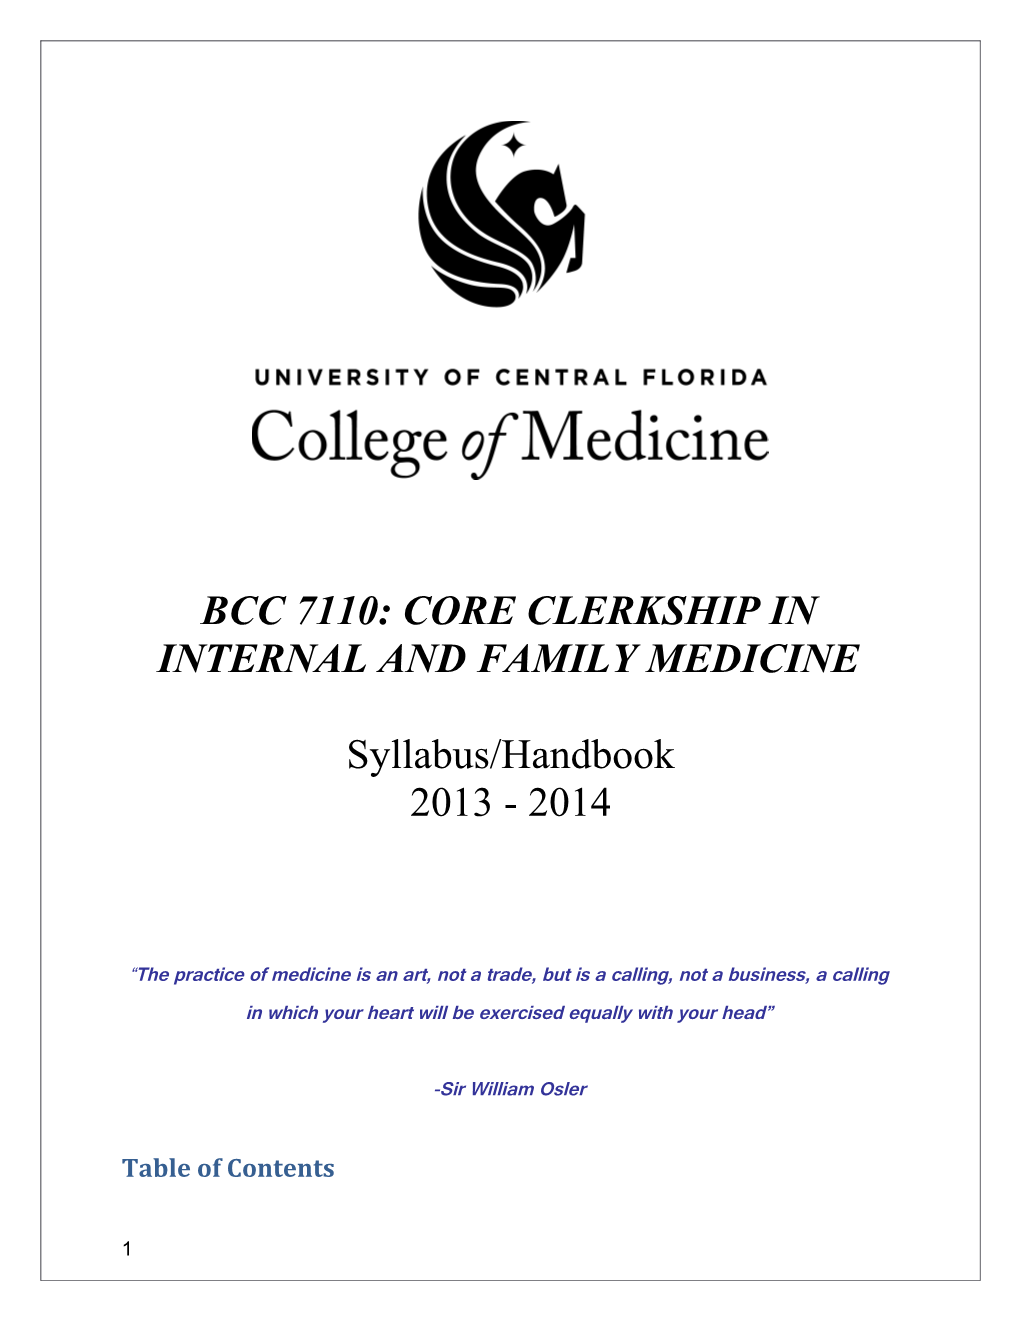 Bcc 7110: Core Clerkship in Internal and Family Medicine